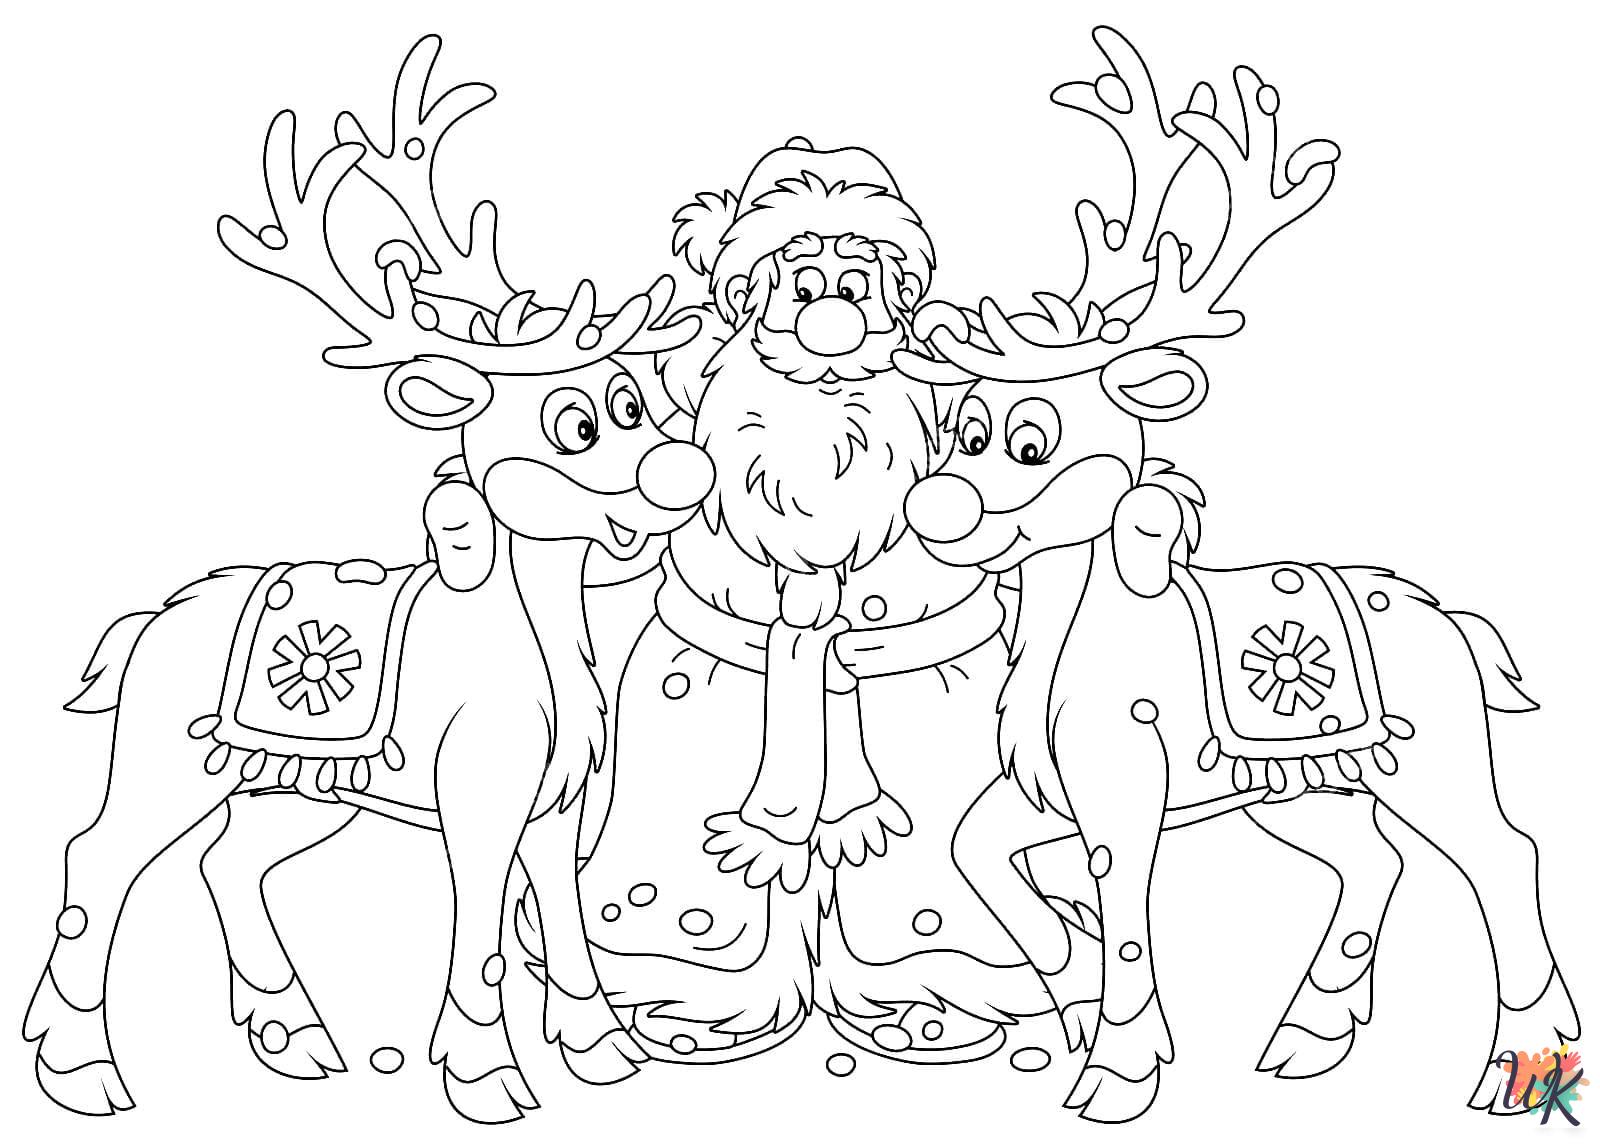 printable Santa coloring pages for adults